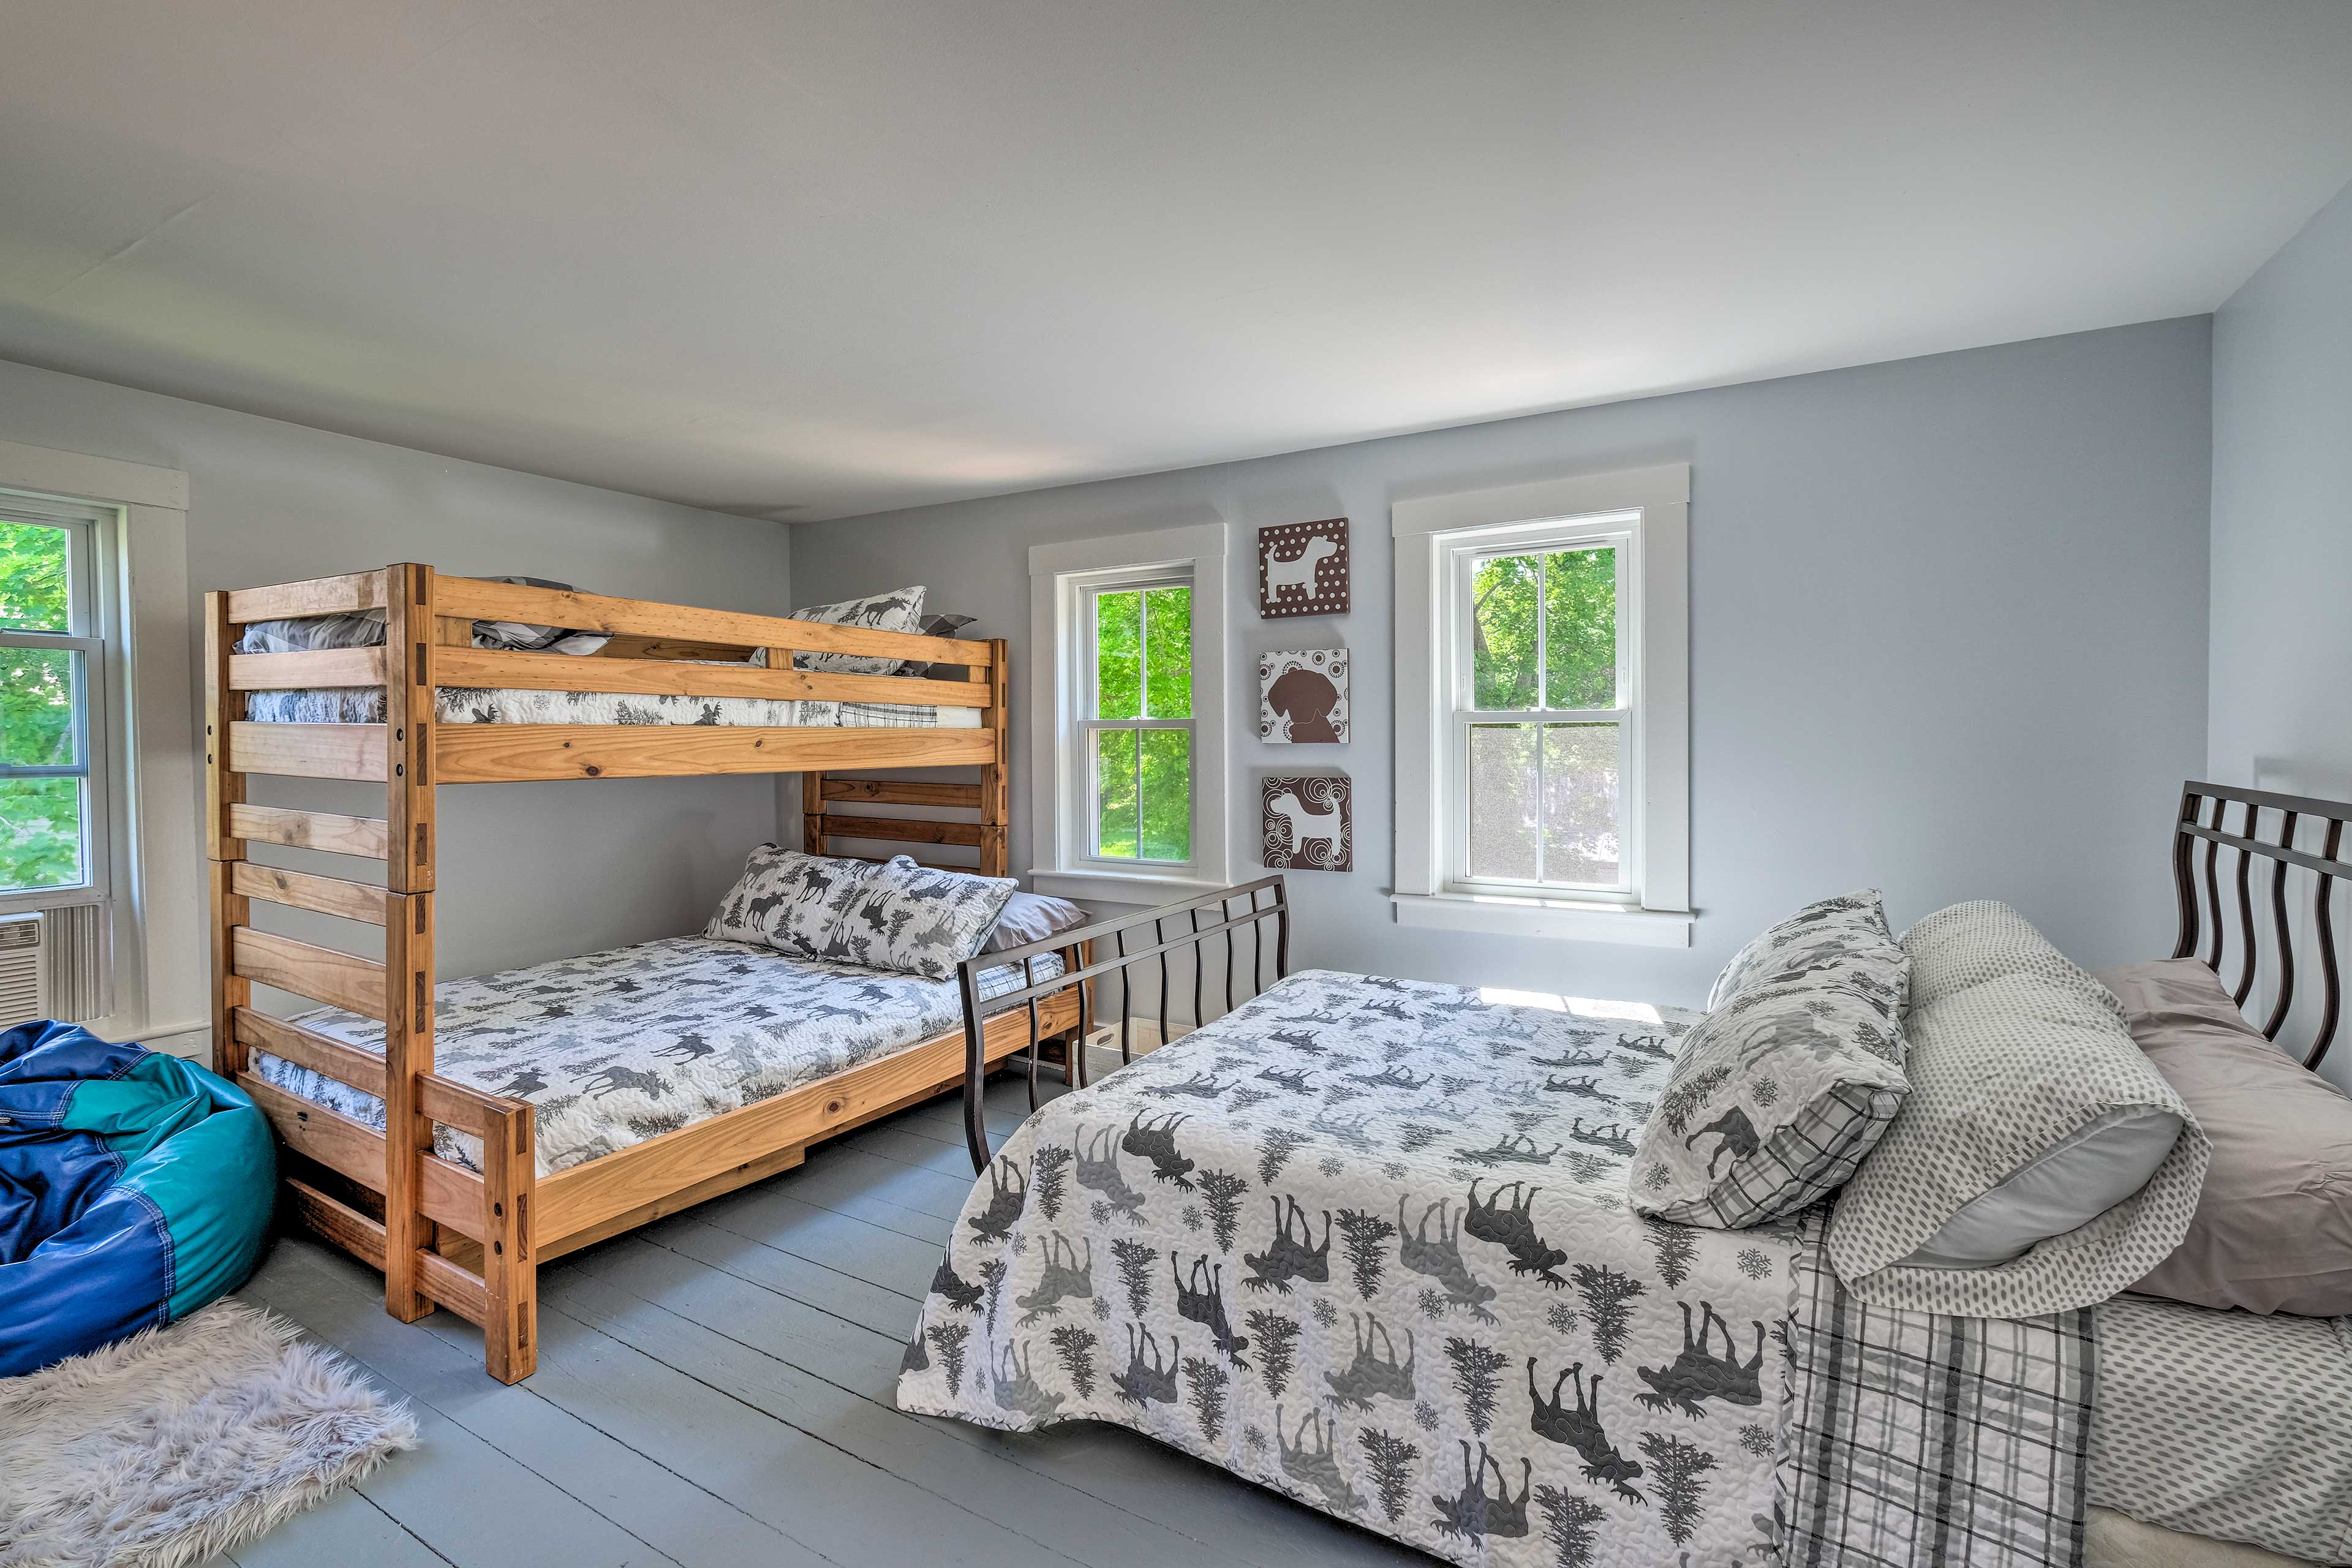 Kids will love this bunk room!